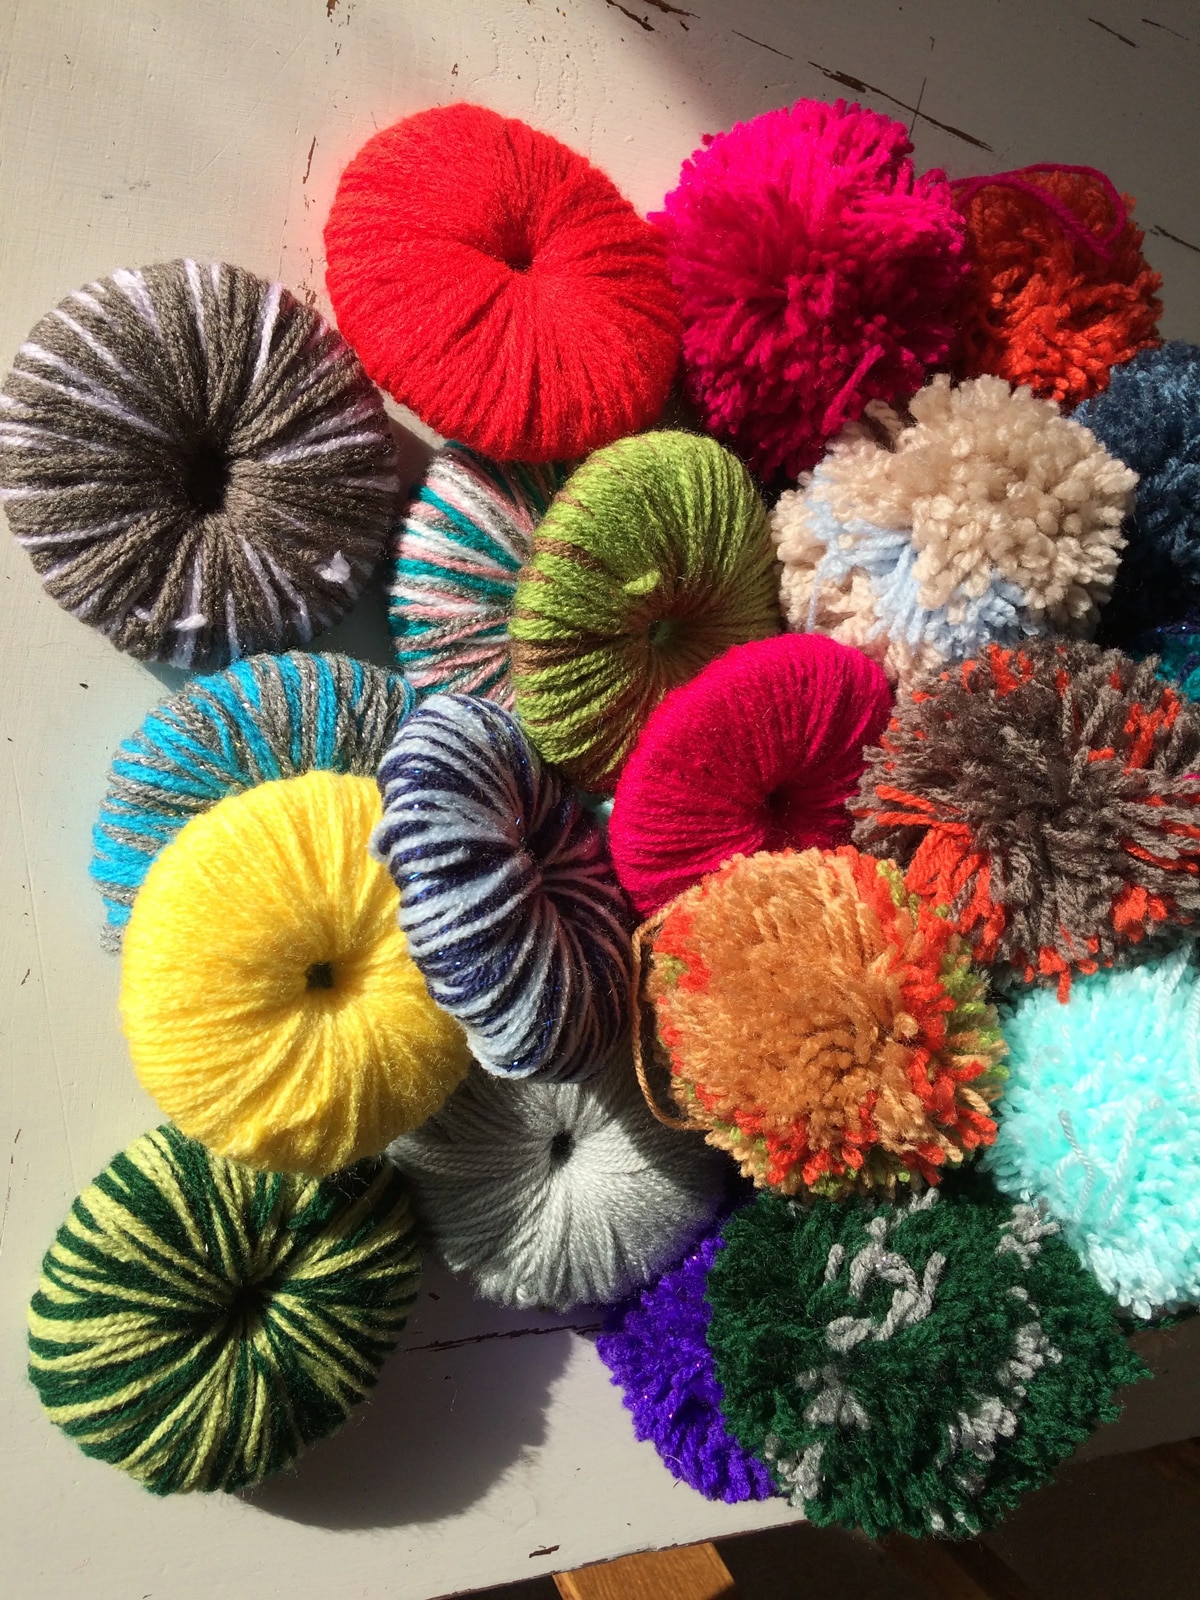 pom poms with wool and cardboard